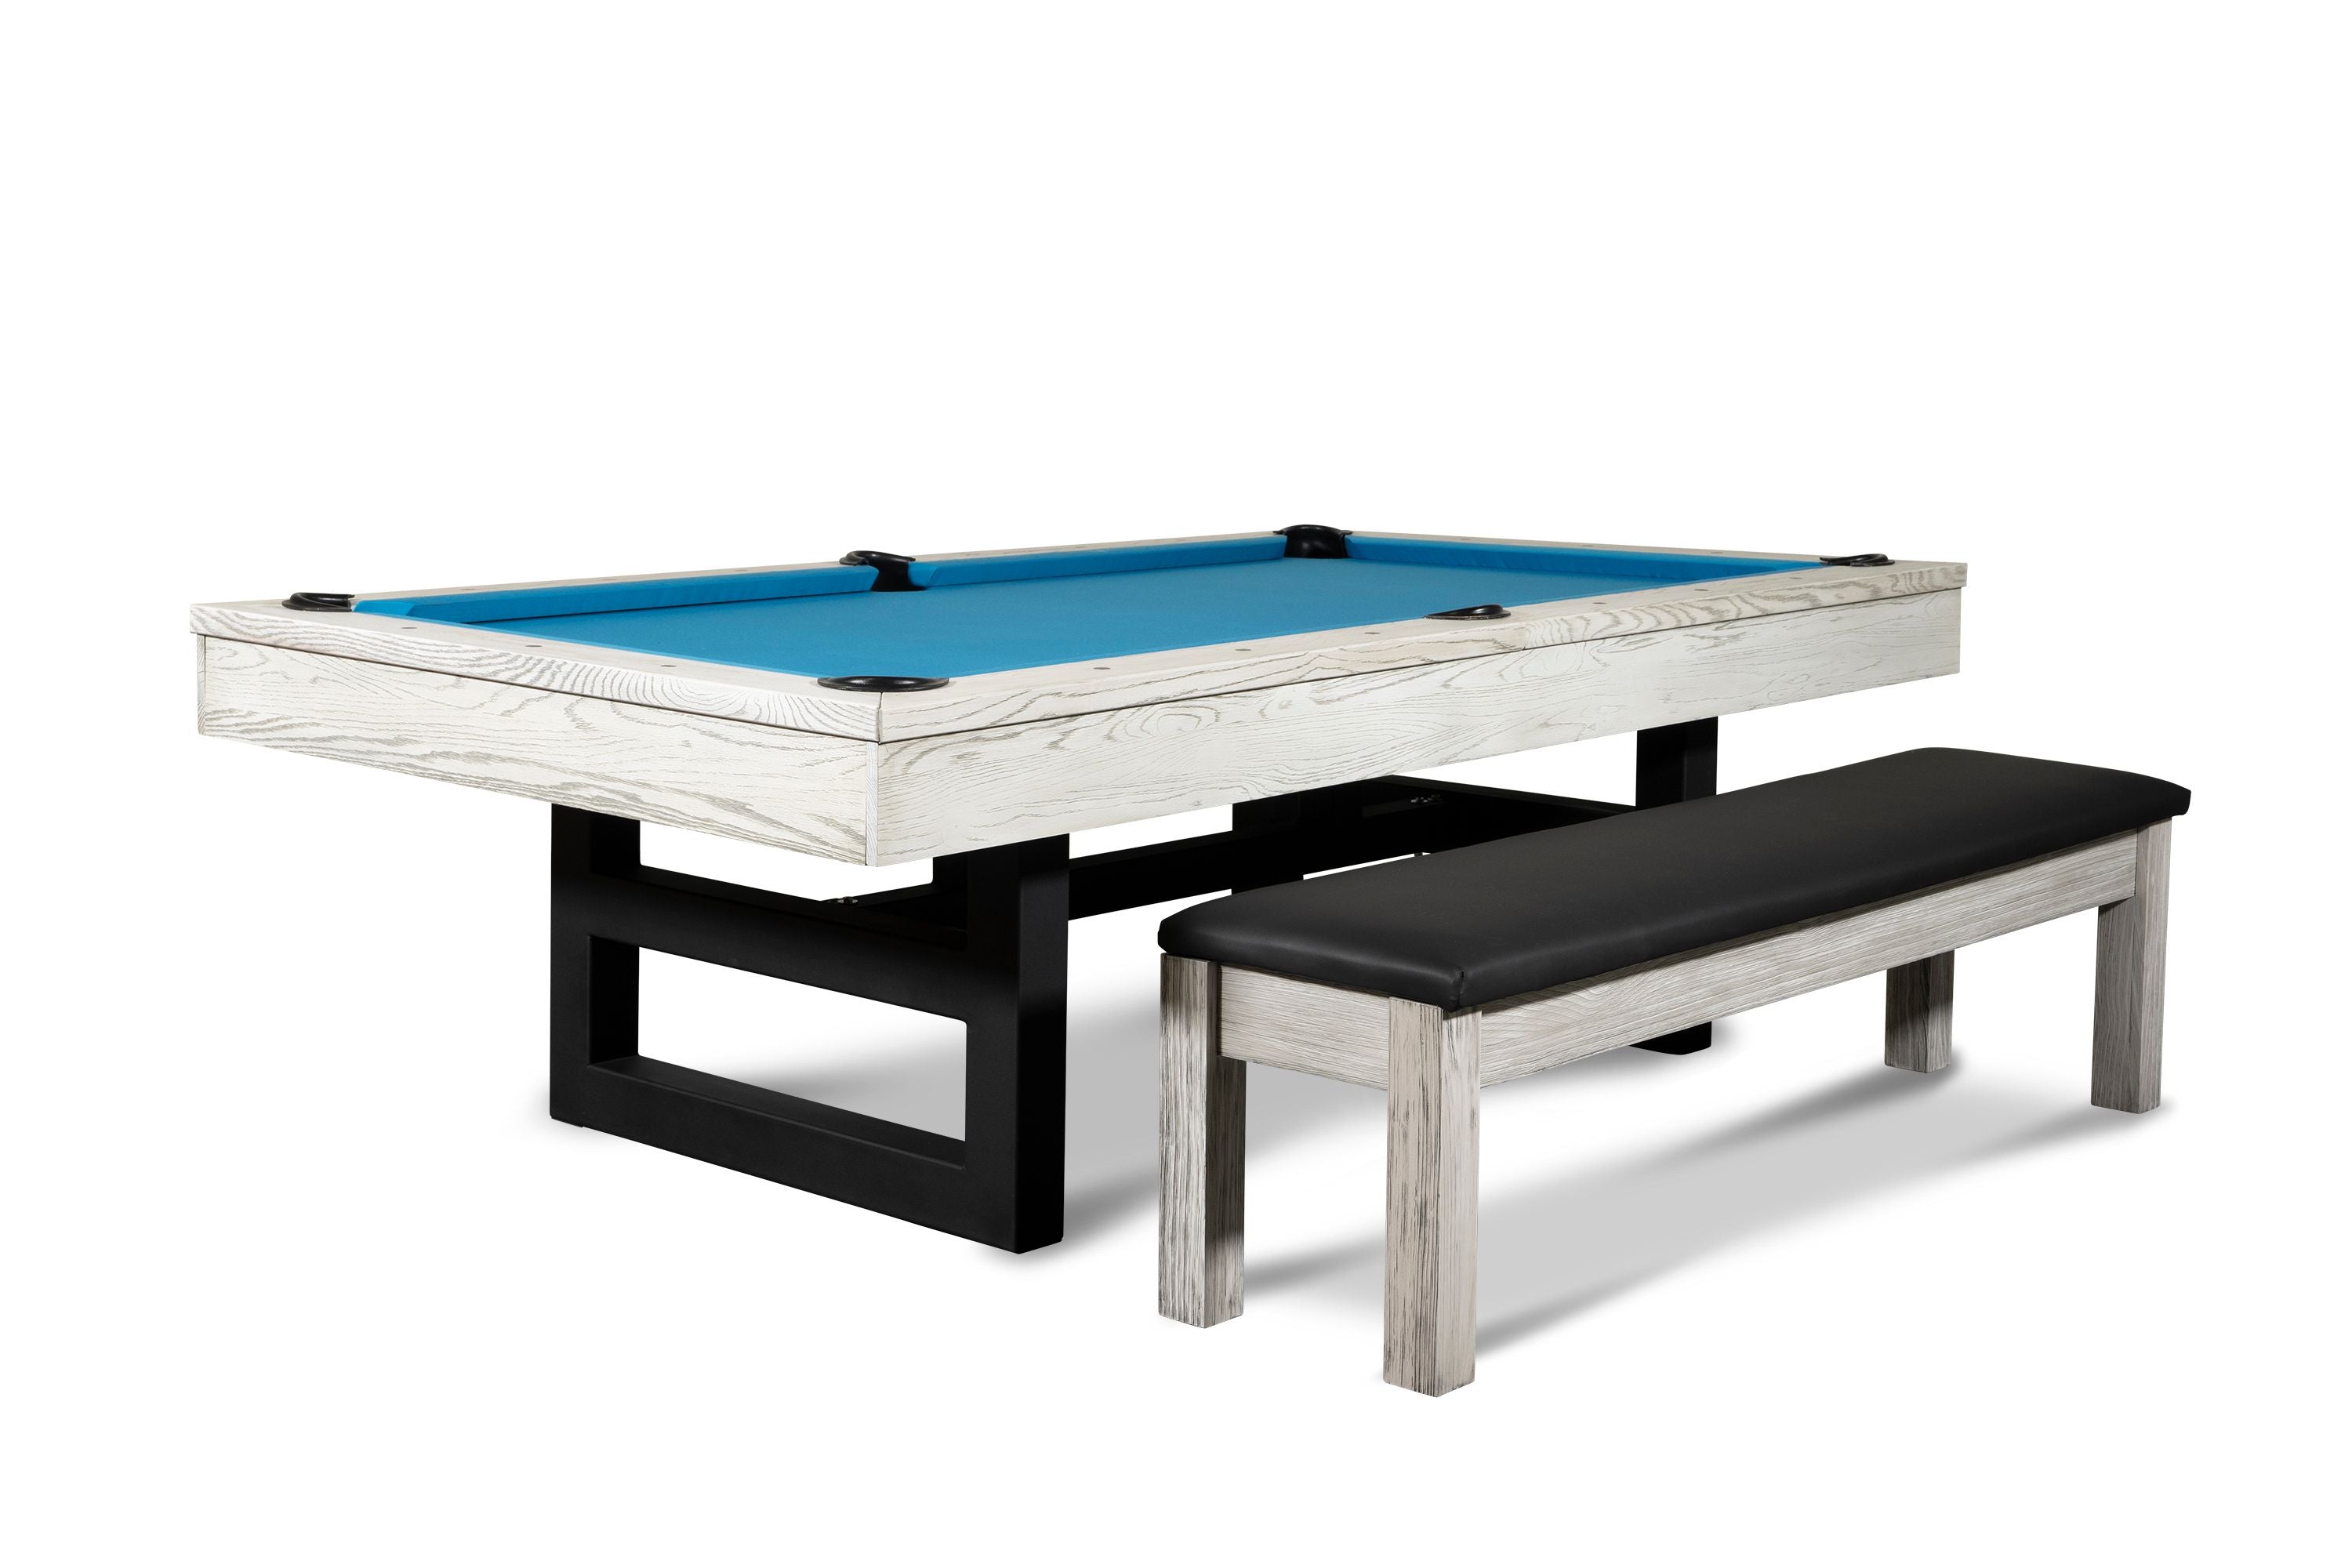 Nixon Billiards Mckay Slate Pool Table ISAF-90070/ISAF-90071 White Wash With Matching Game Chiar